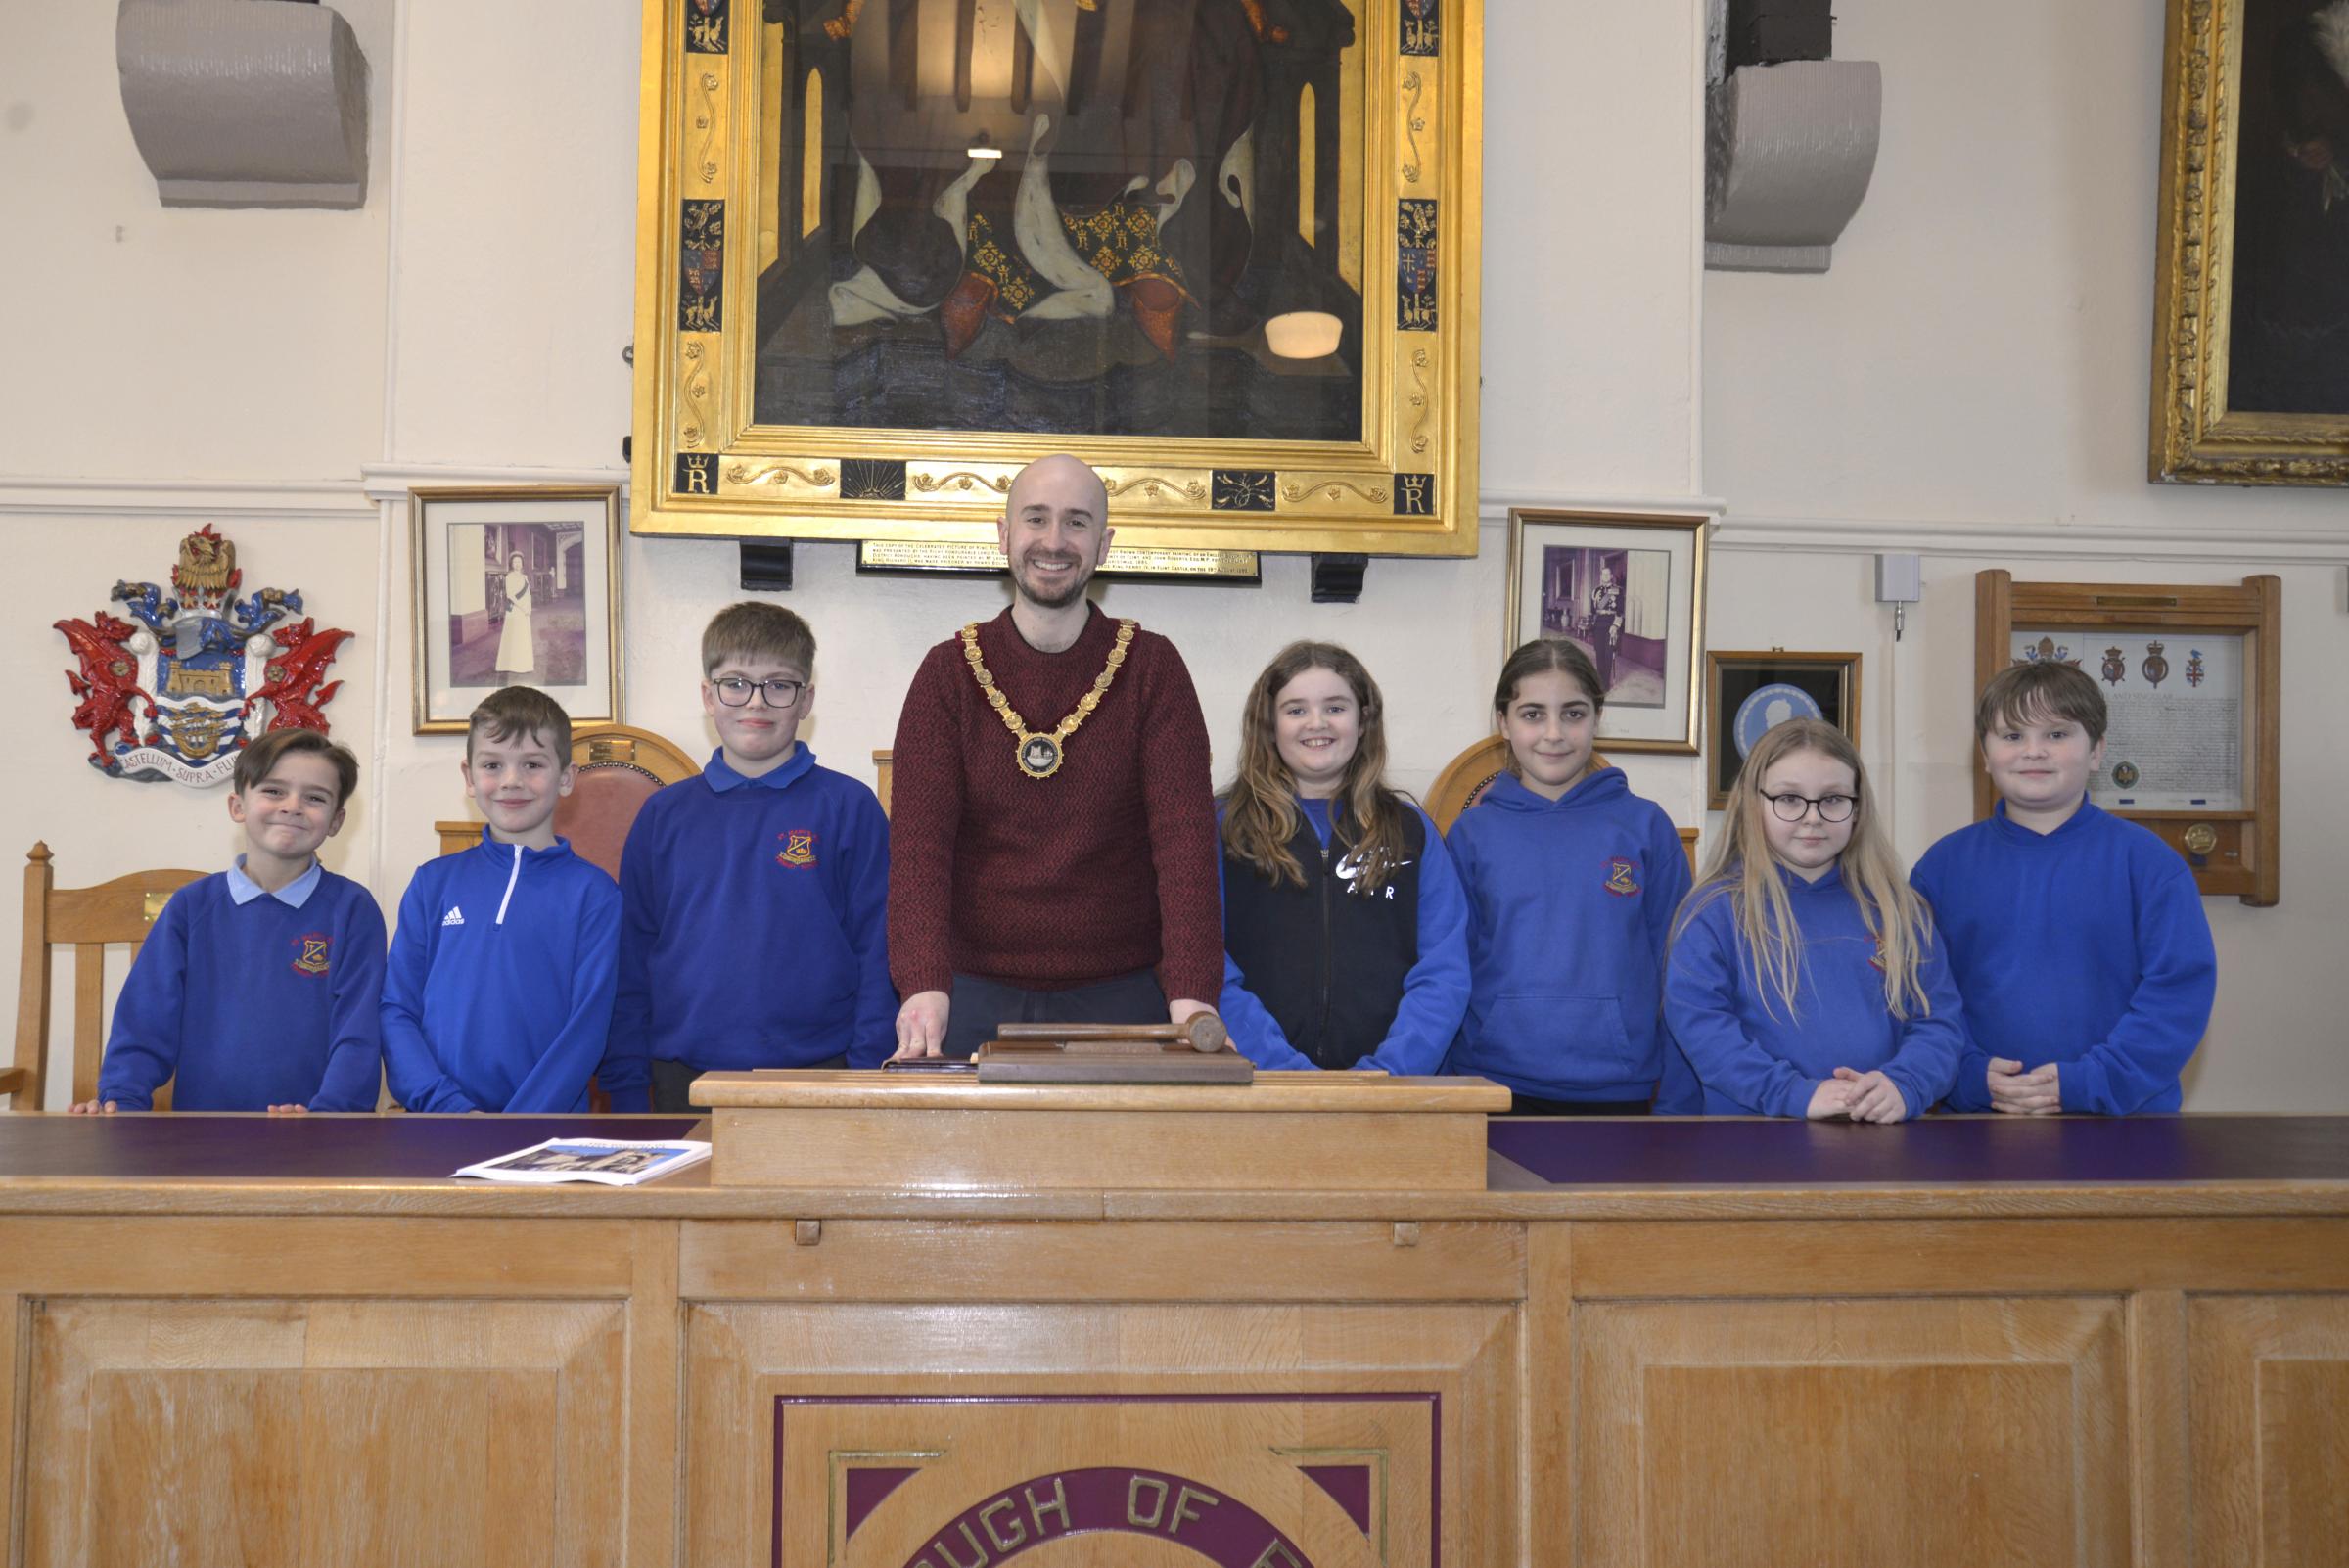 St Marys School pupils visit to Flint Town Council Chamber, pictured with Mayor Cllr Ben Goldsborough.